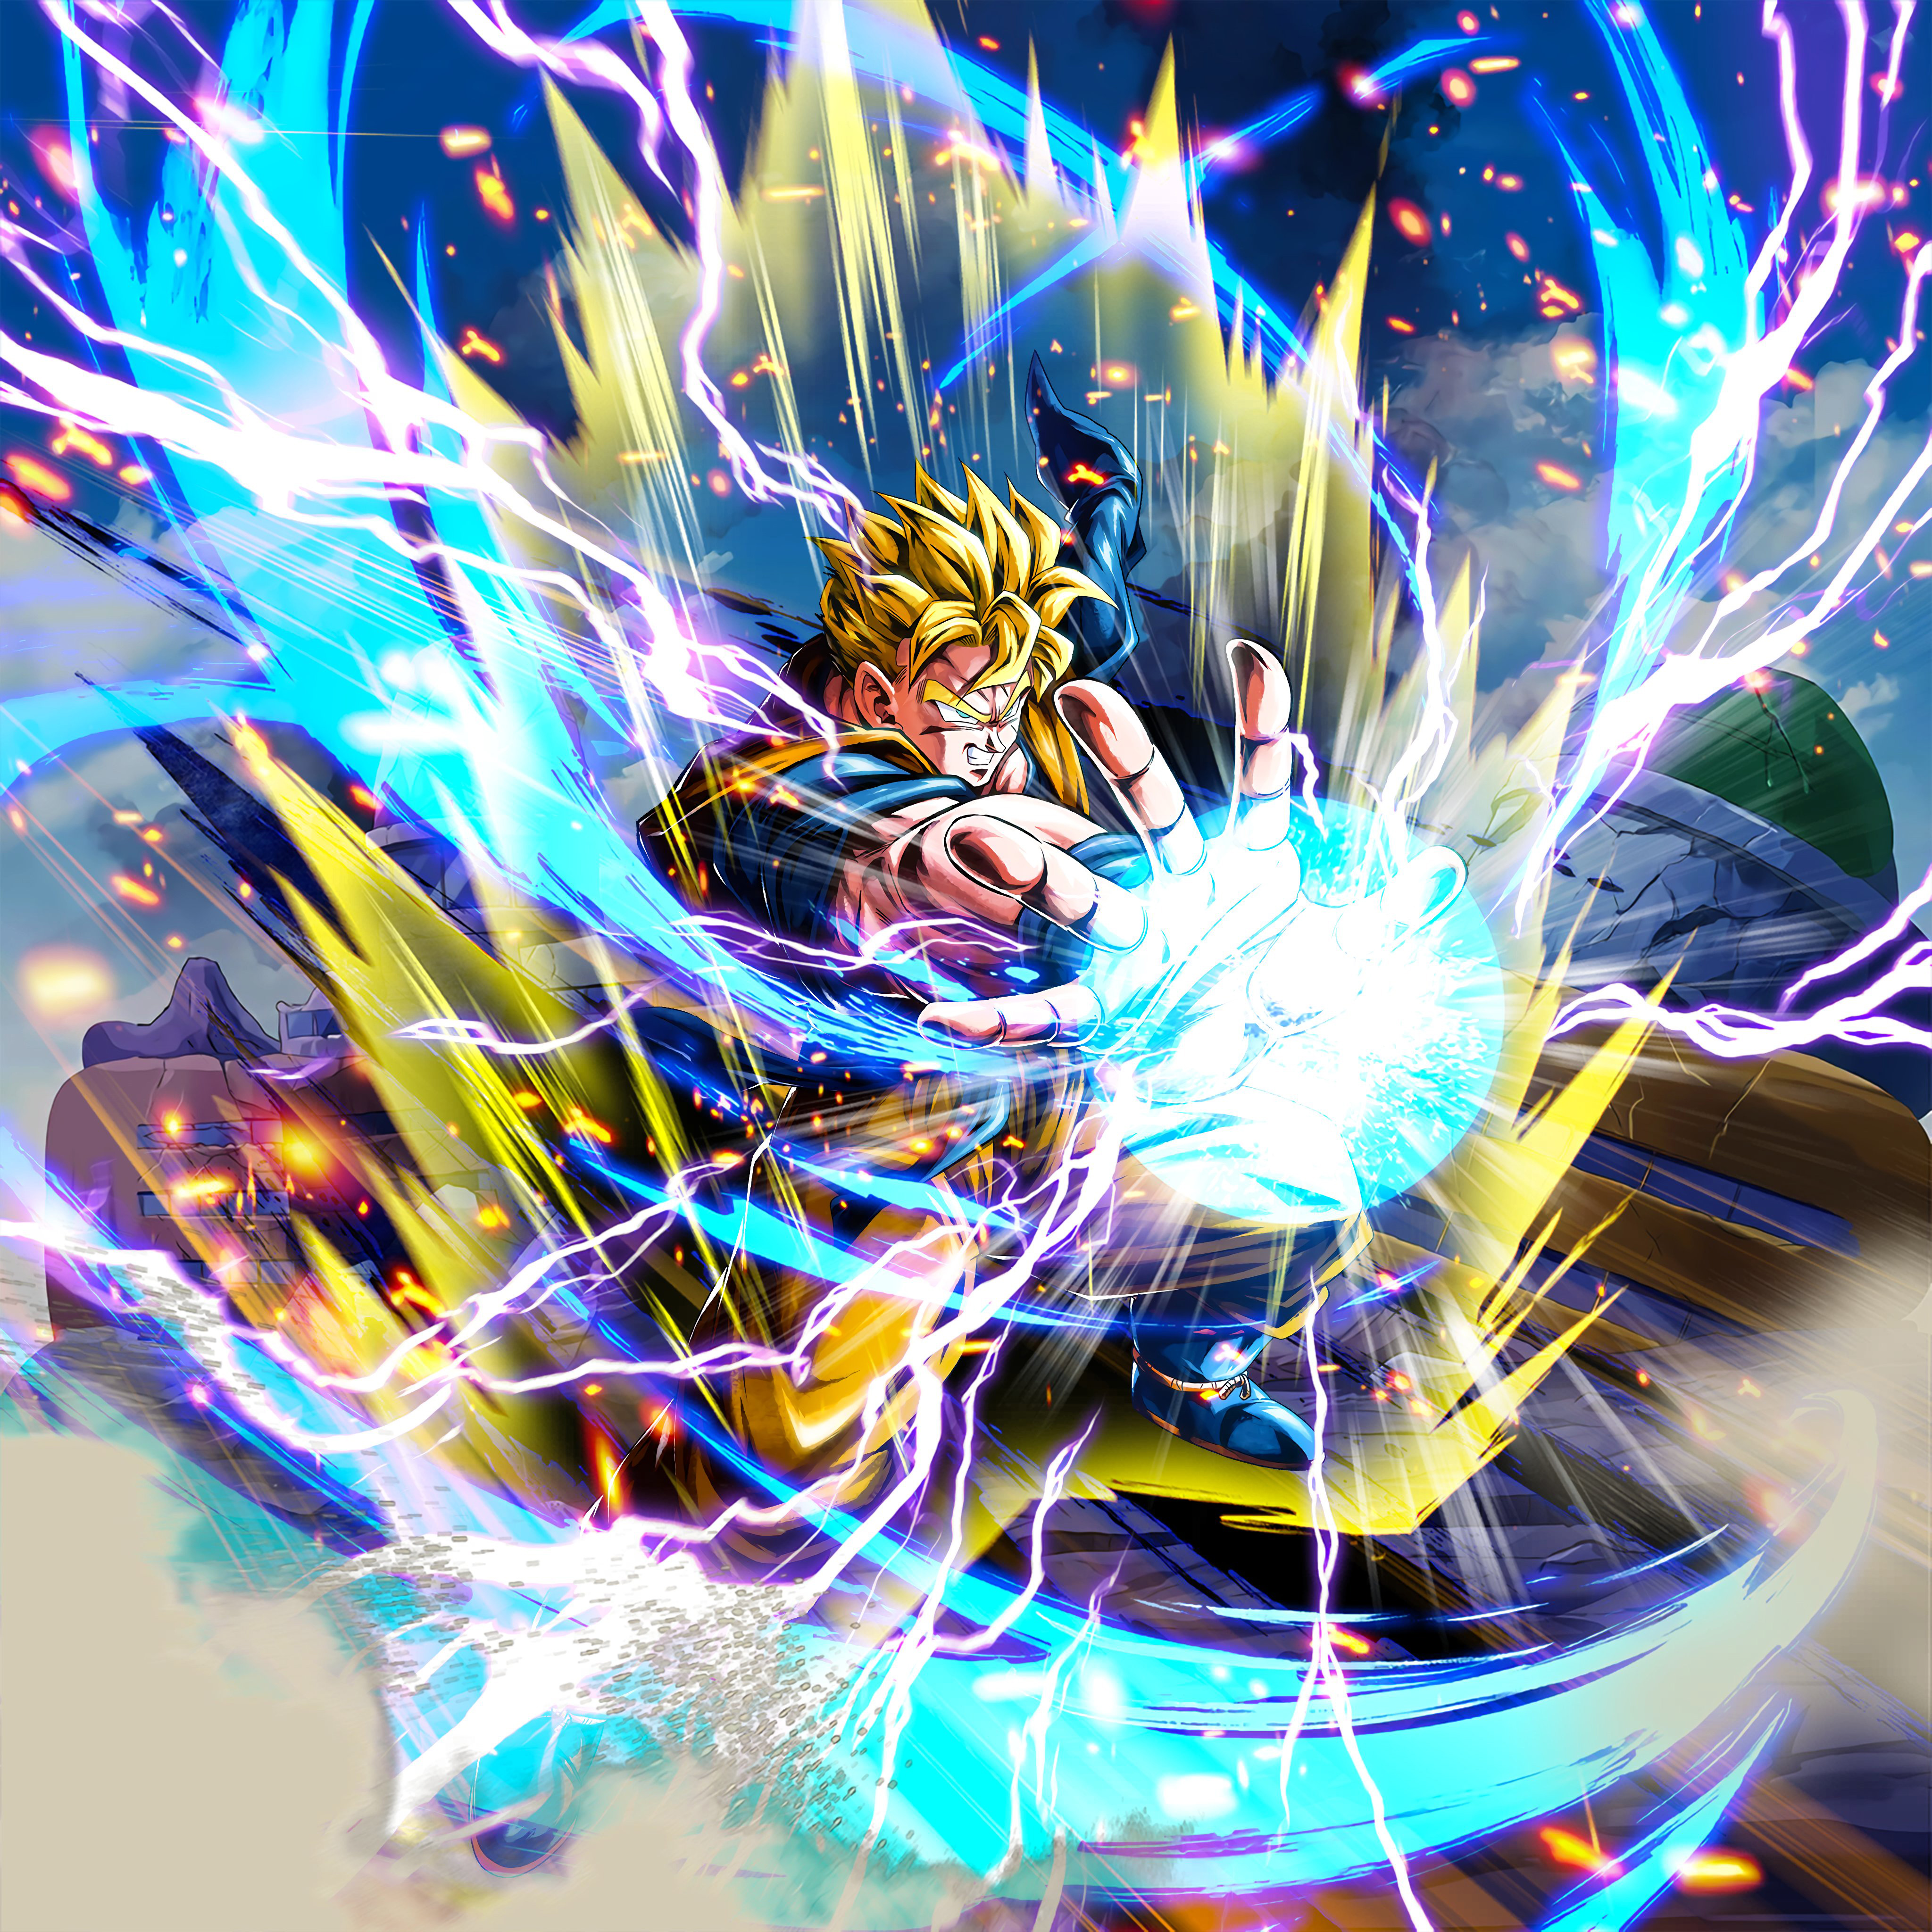 Avatar of Super Saiyan 2 Gohan unleashing power in Dragon Ball Legends game artwork, ideal for profile picture use.